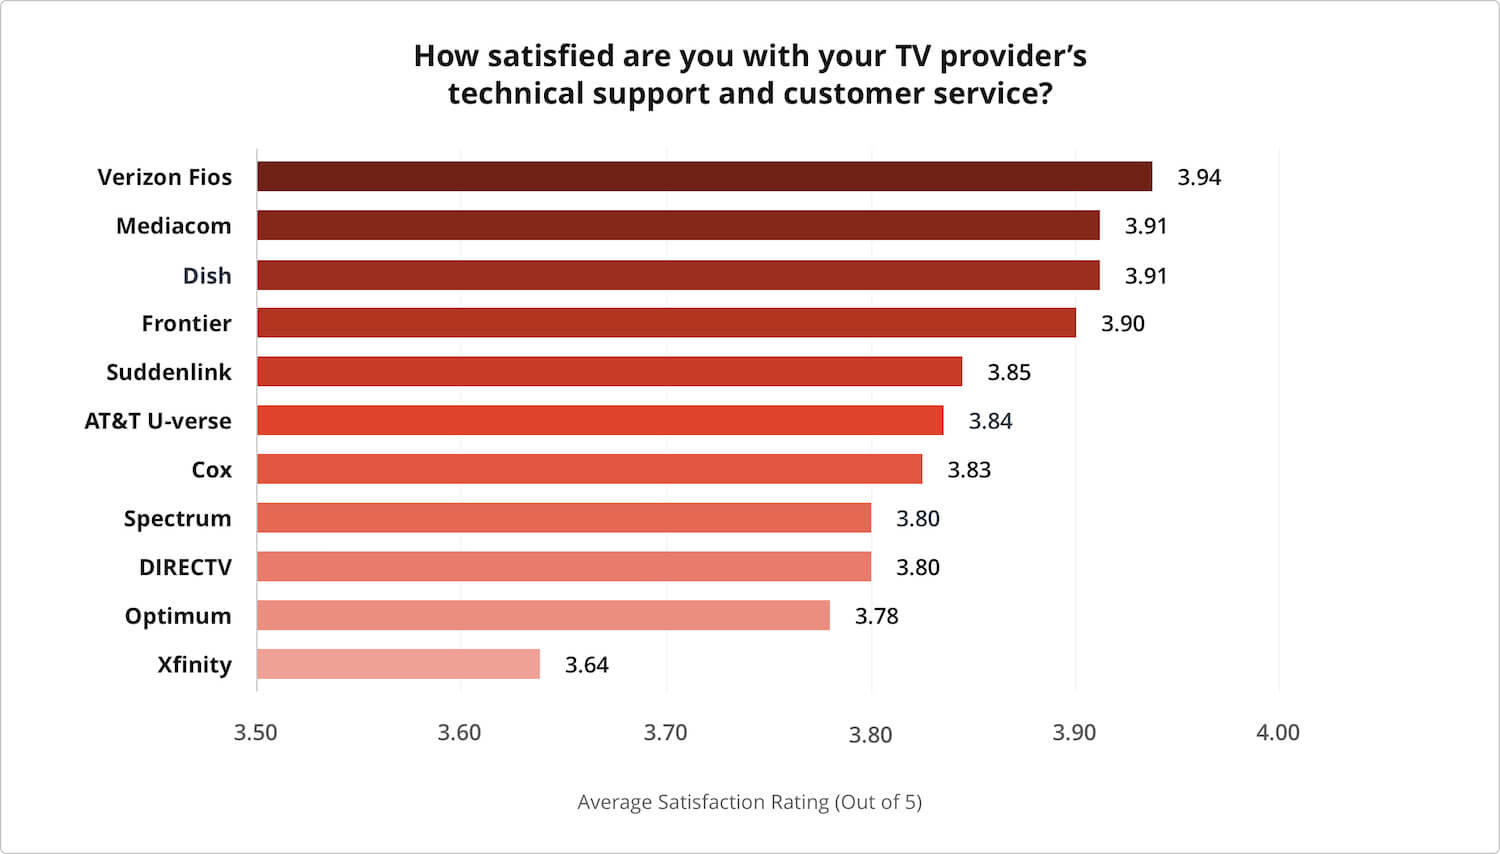 Satisfaction survey results for TV provider's technical support and customer service